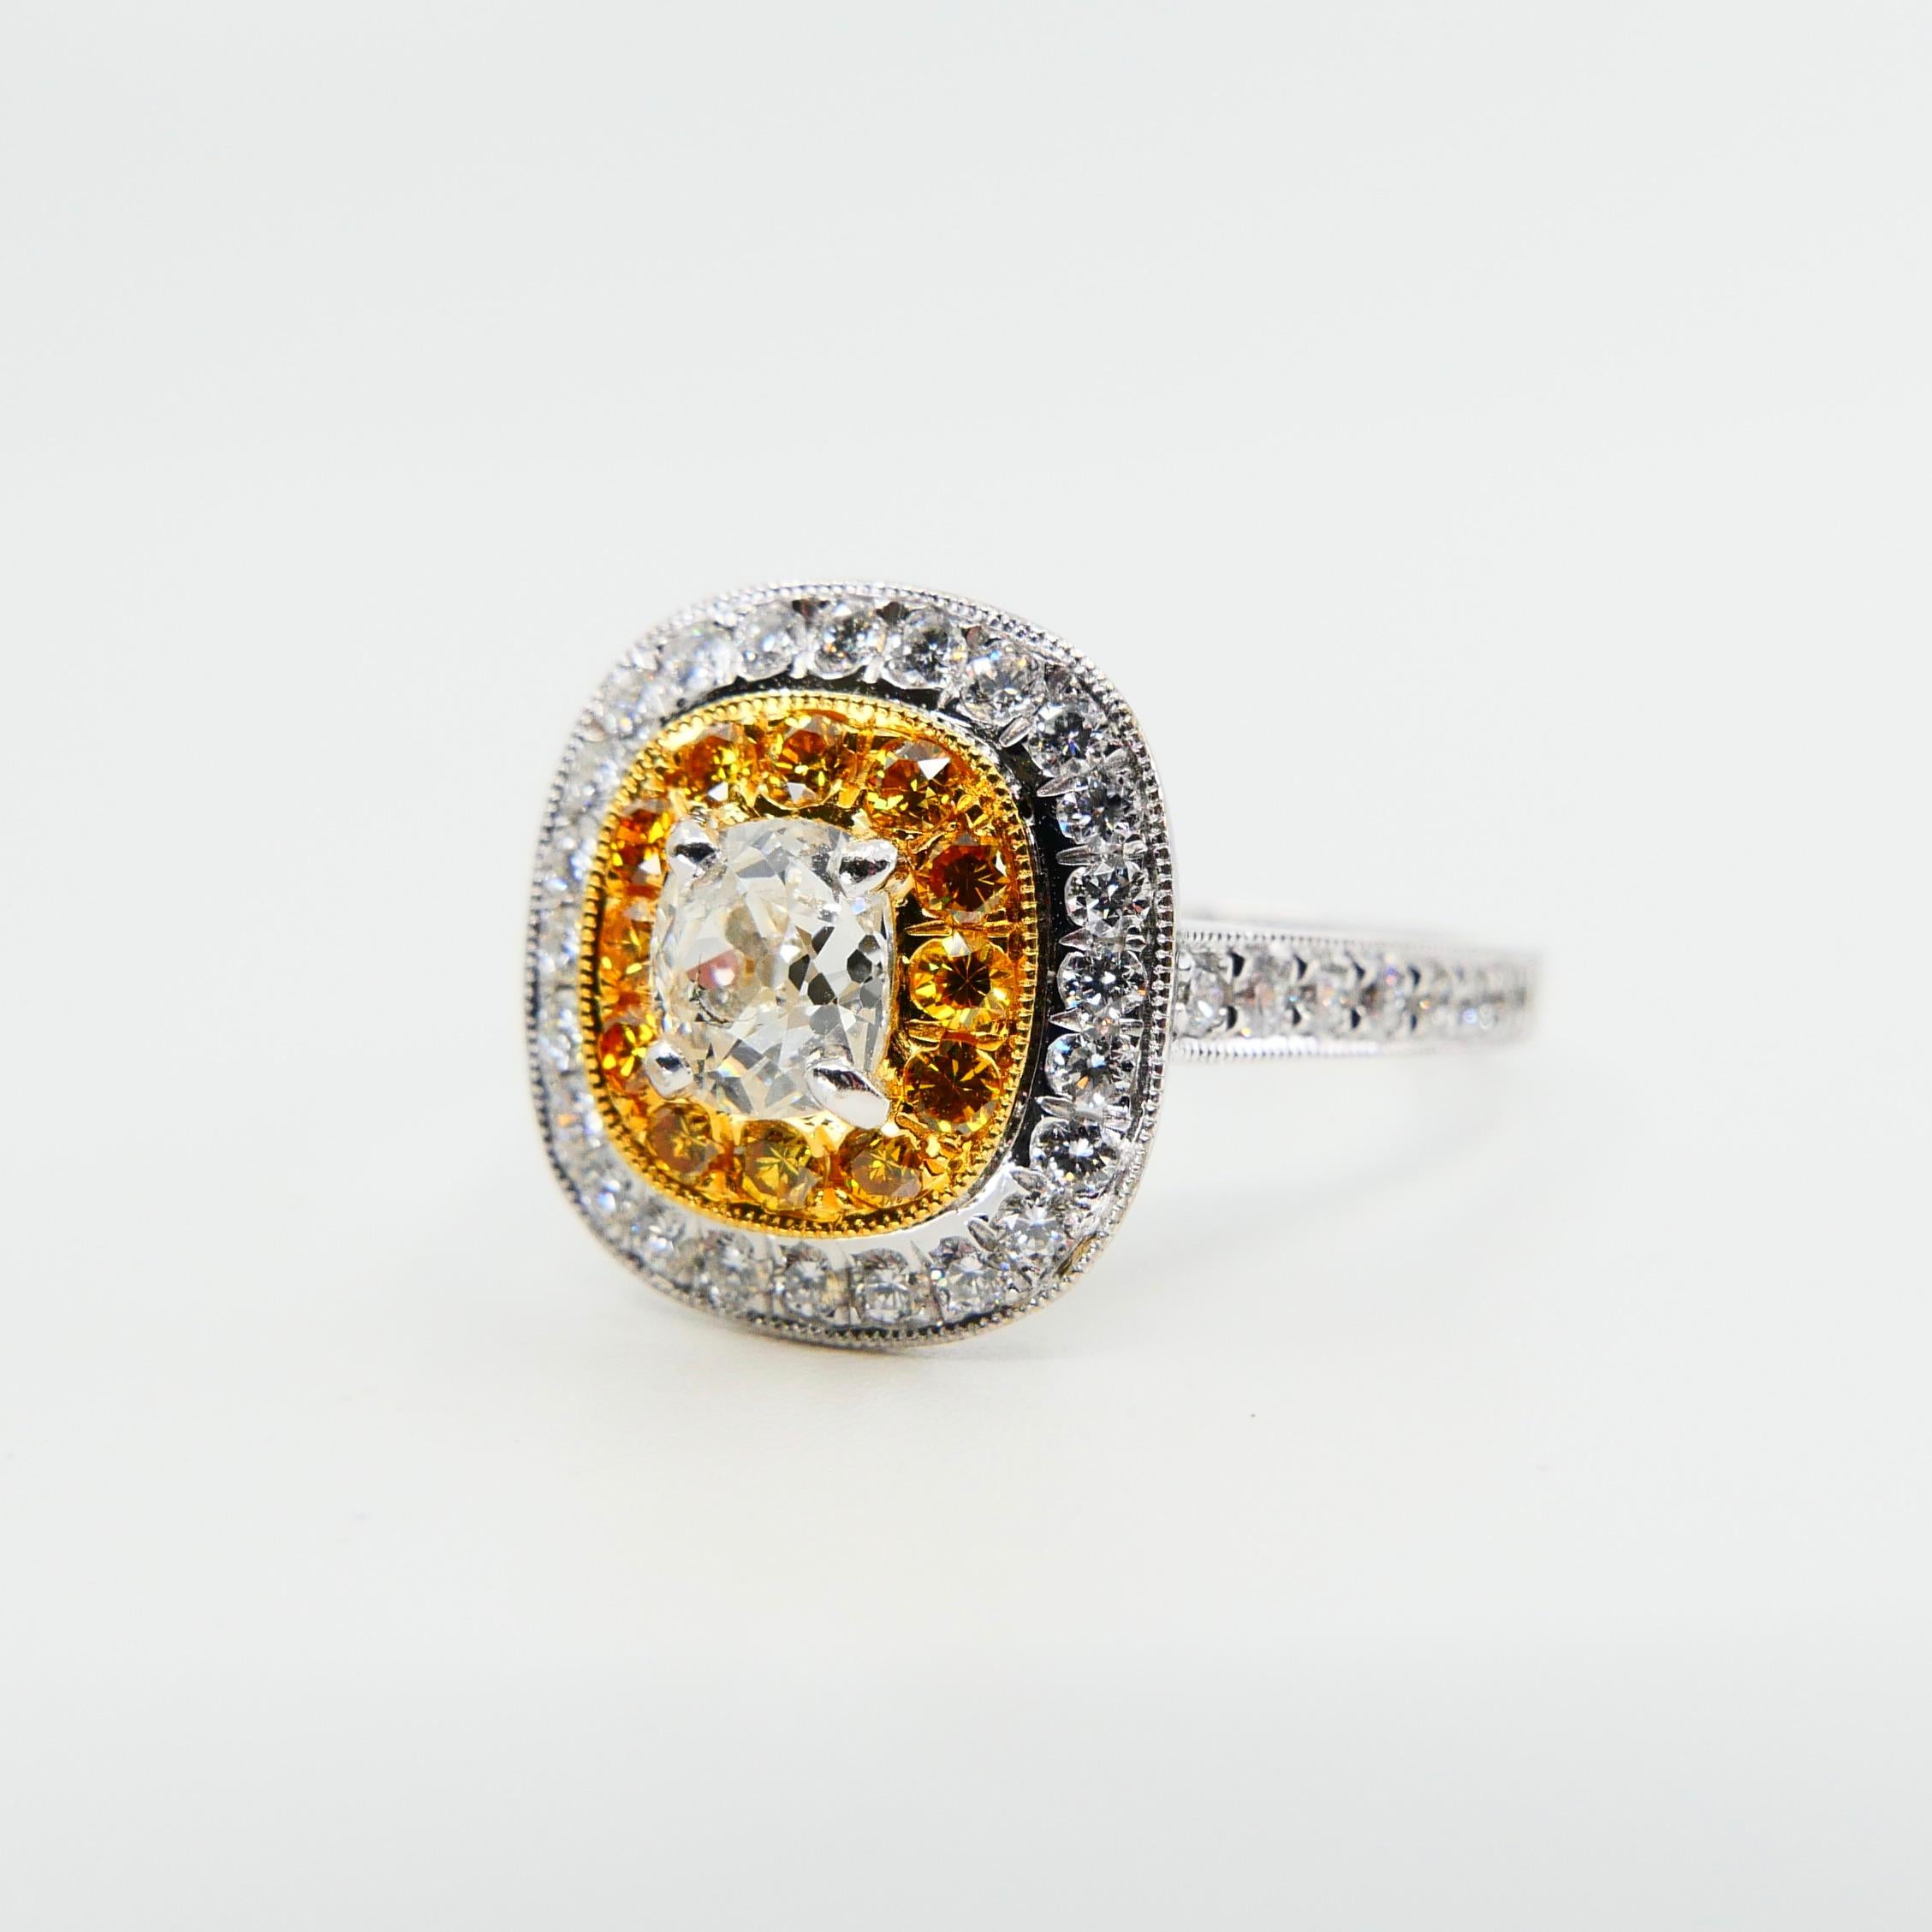 Women's 0.54 Cts Old Mine Cut & Fancy Vivid Yellow Diamond Cocktail Ring, 18K White Gold